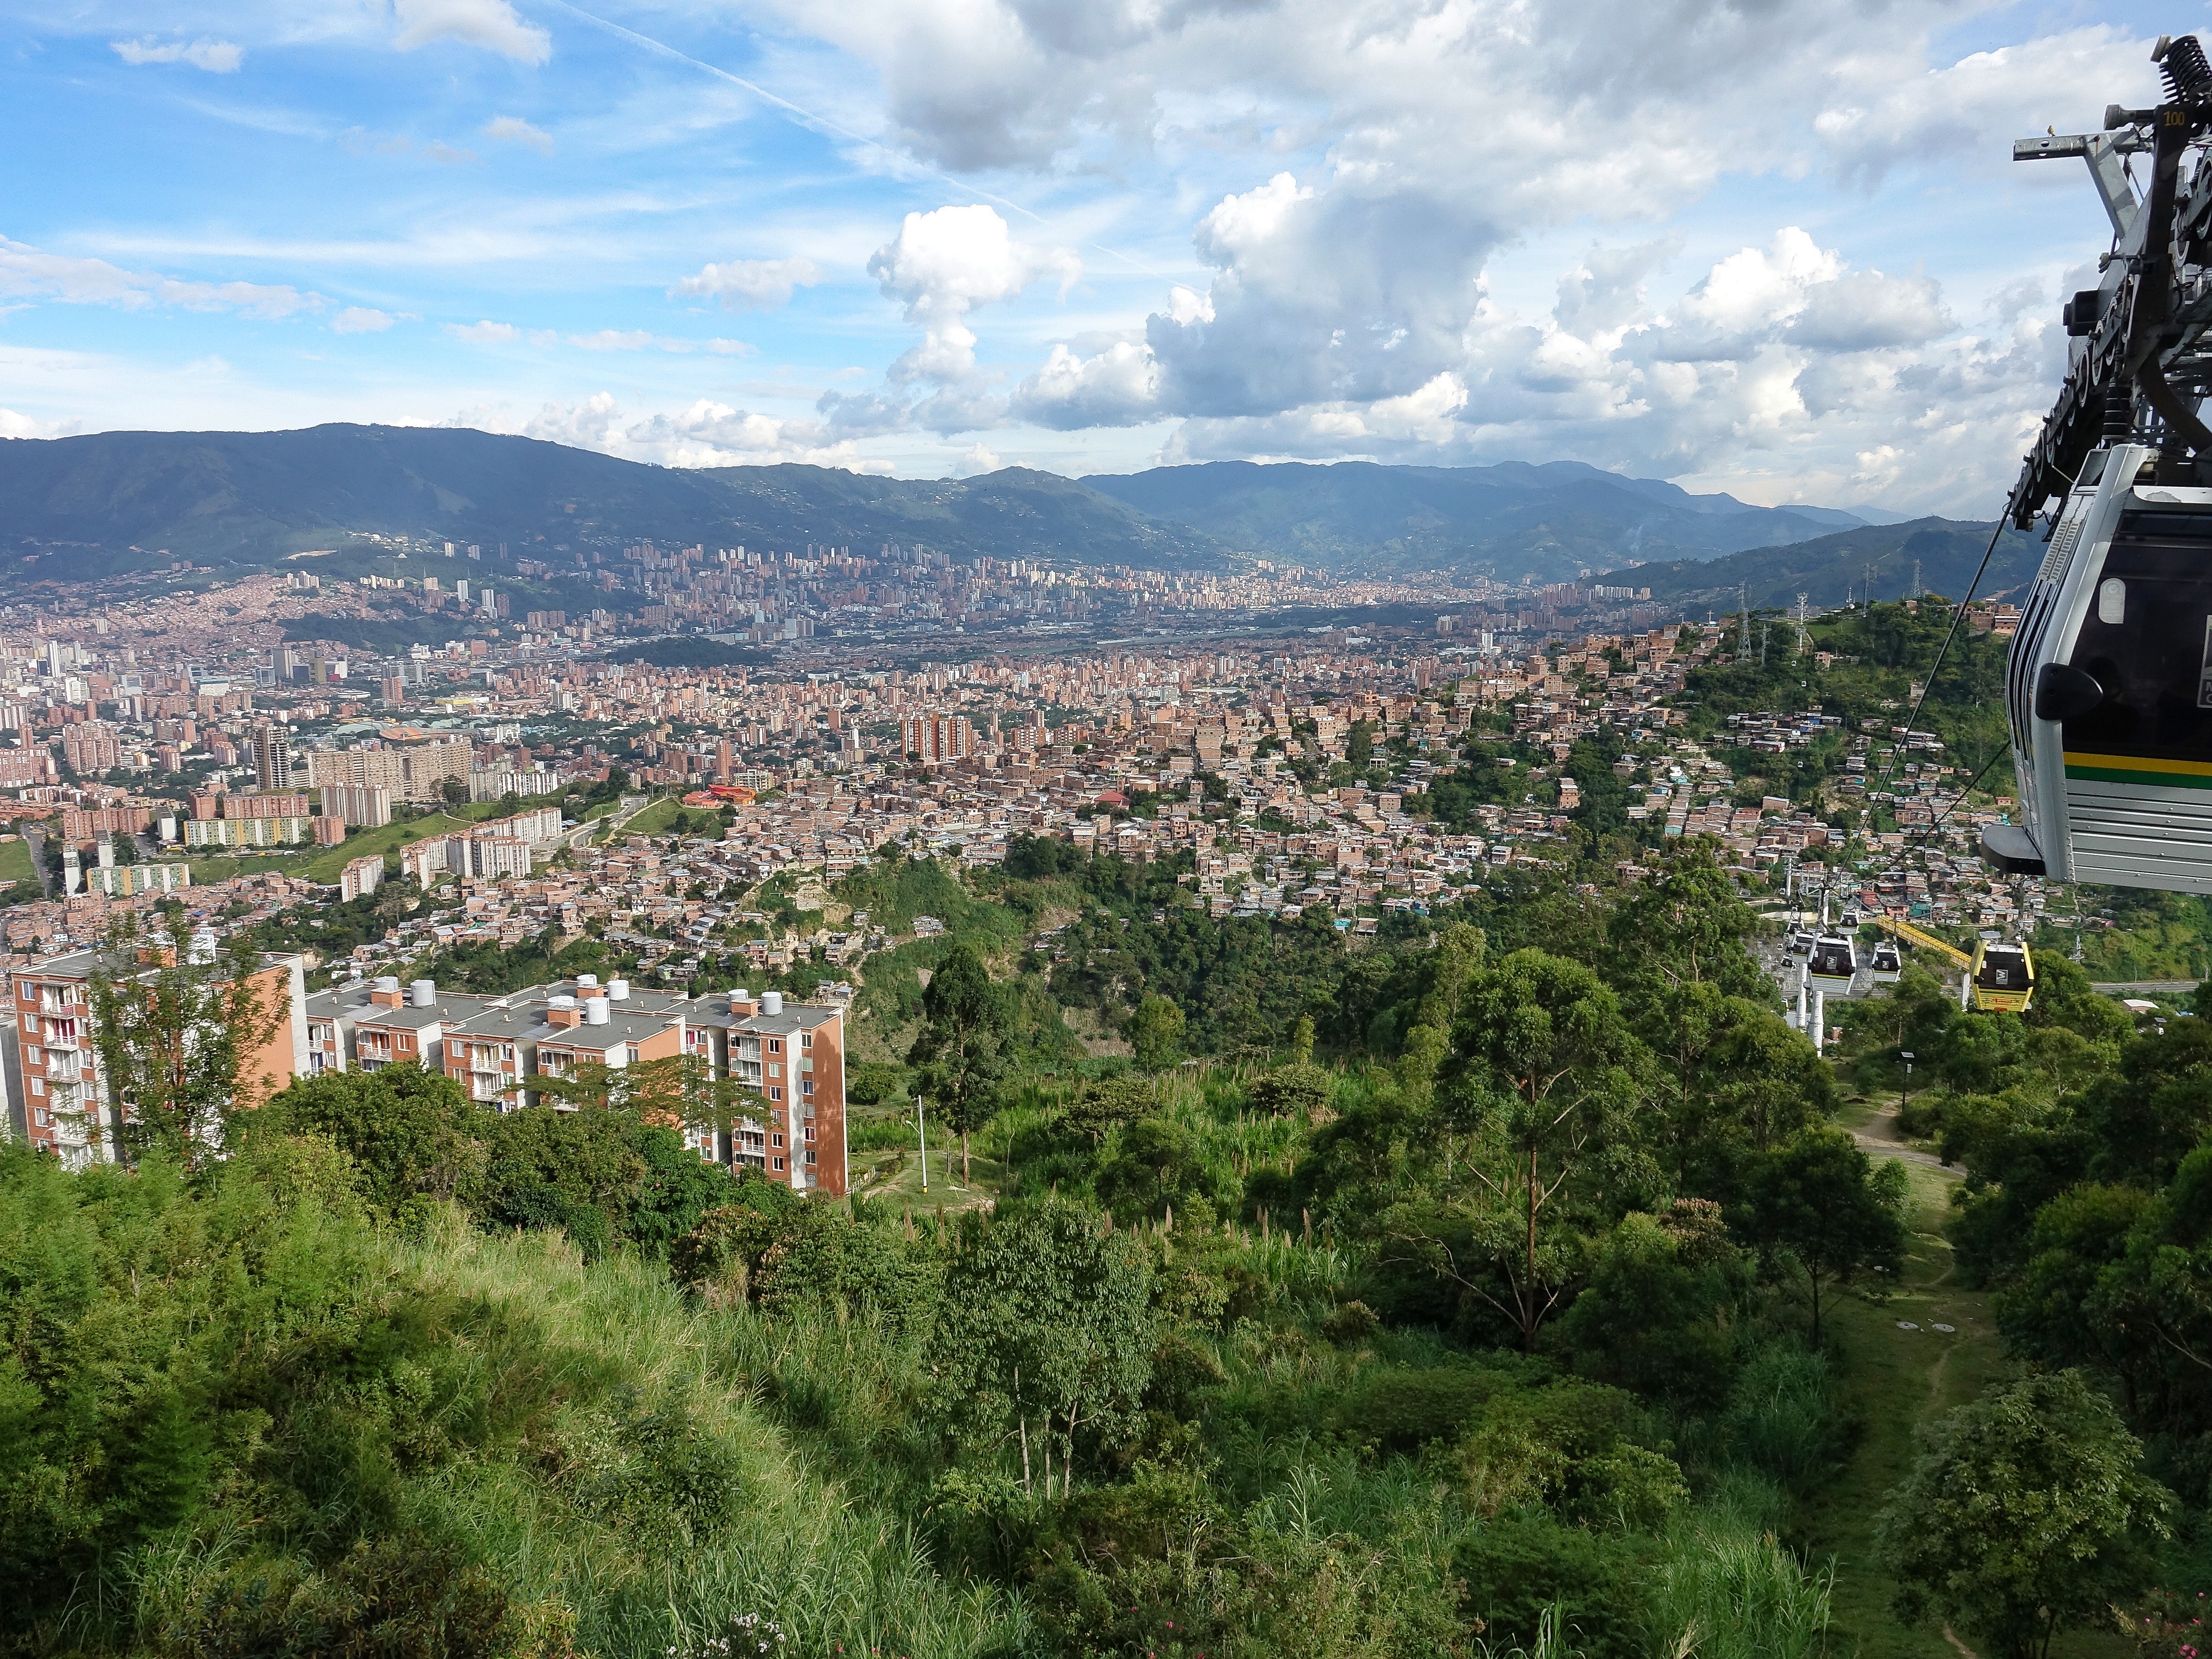 Medellin in the valley